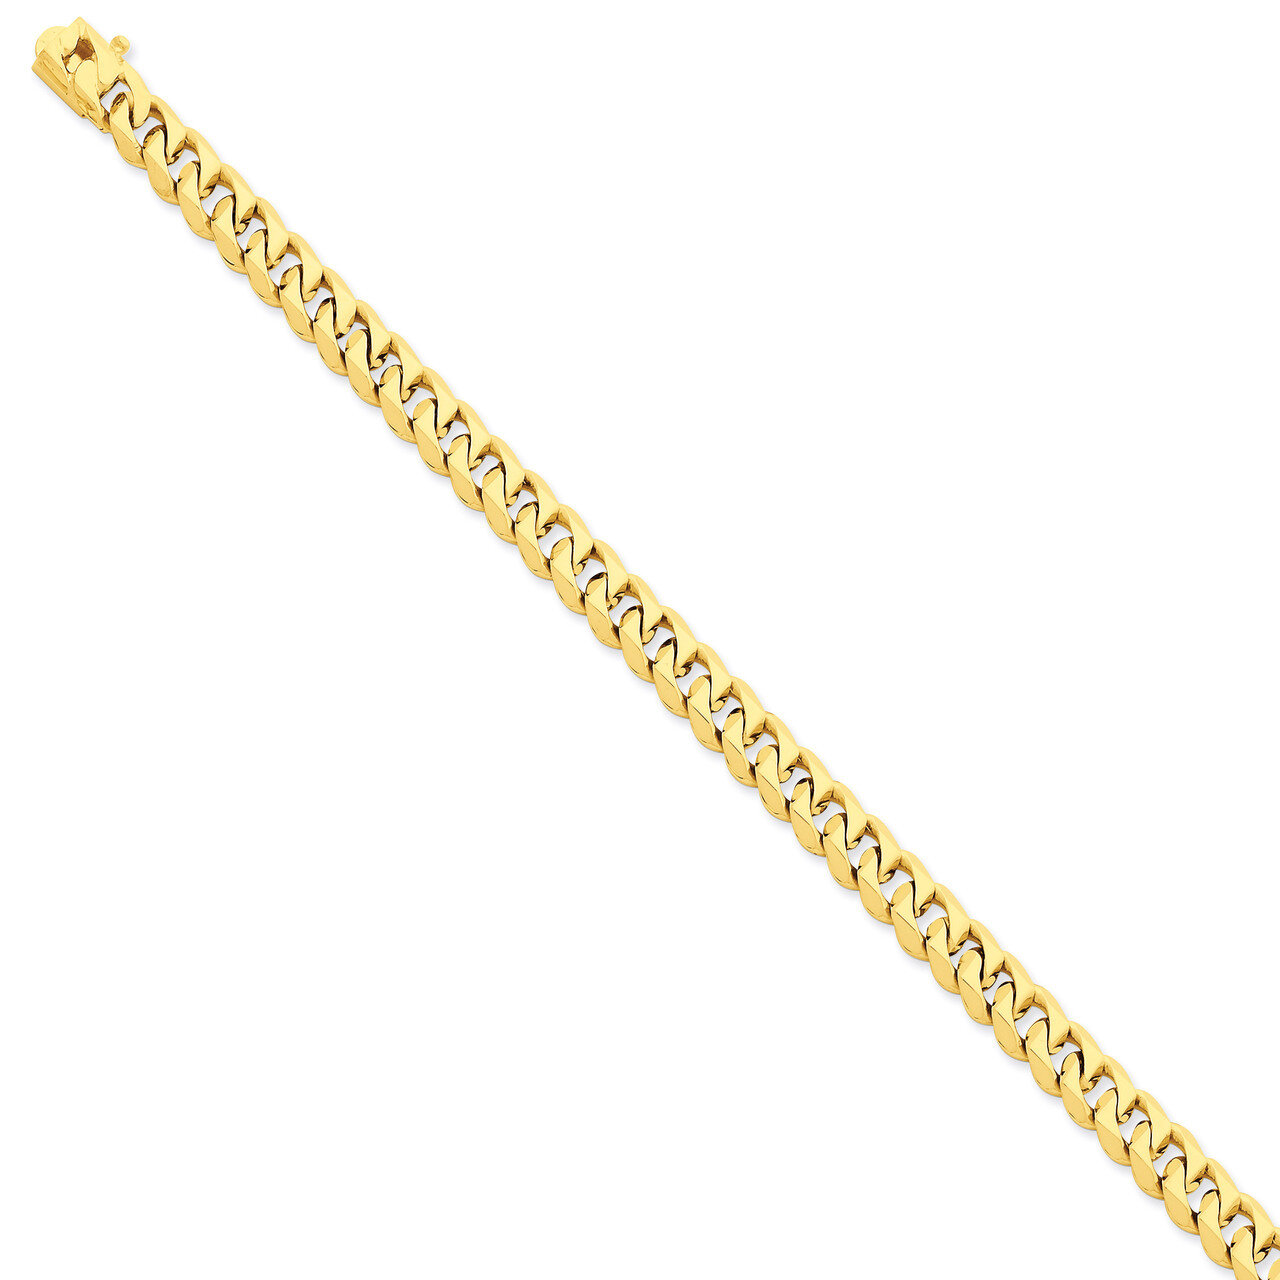 7mm Hand-Polished Traditional Link Chain 24 Inch 14k Gold LK117-24